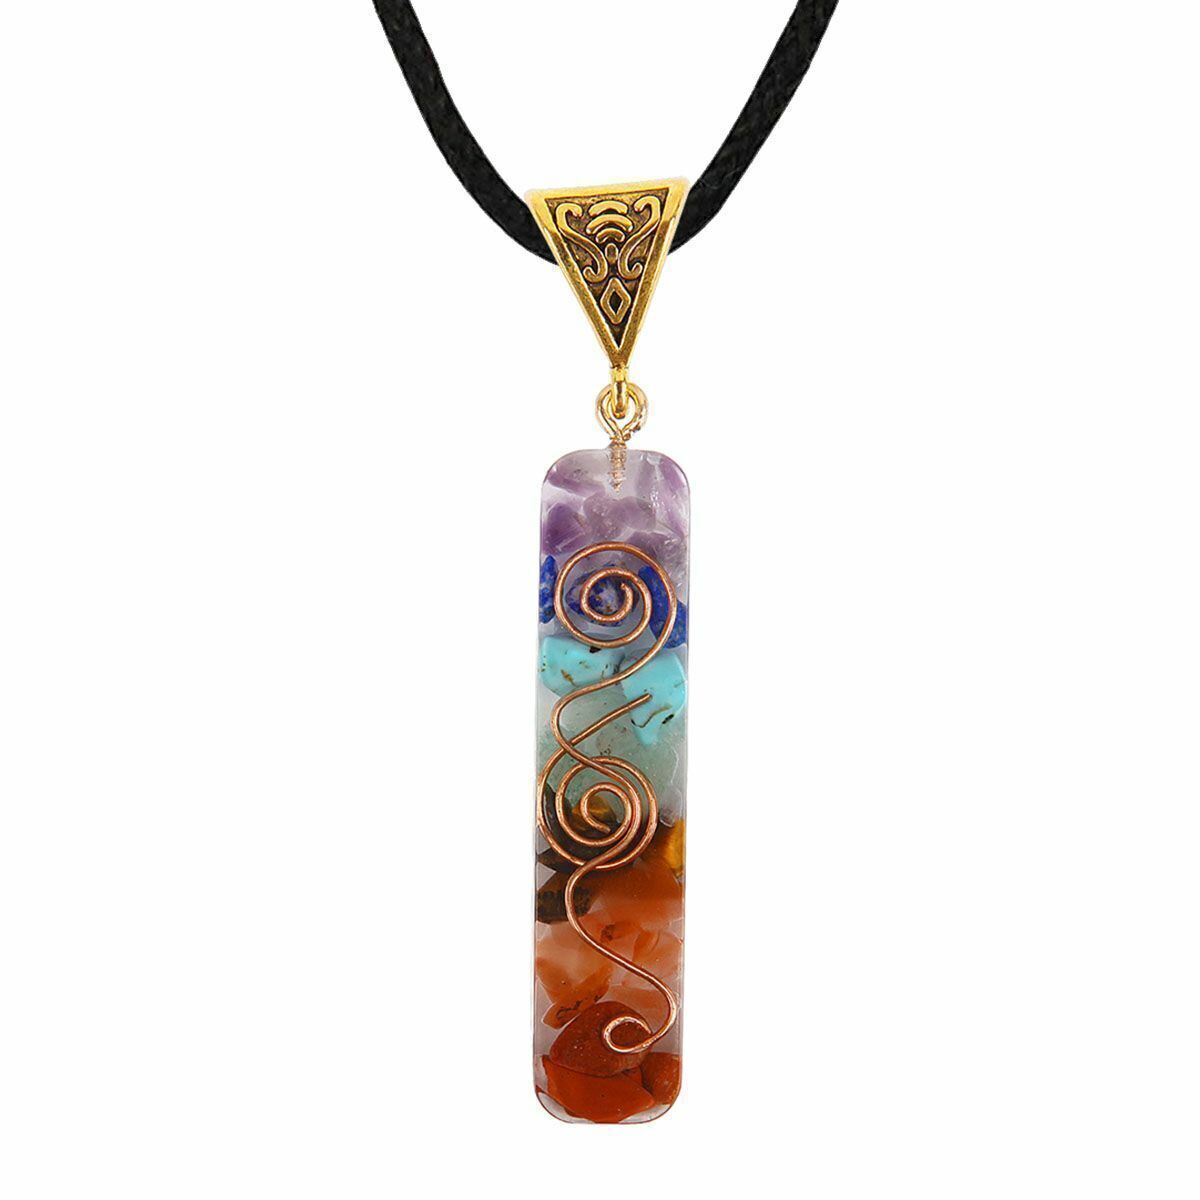 US 7 Chakra Orgone Energy Generator Pendant Copper Coil Orgonite Necklace Gifts